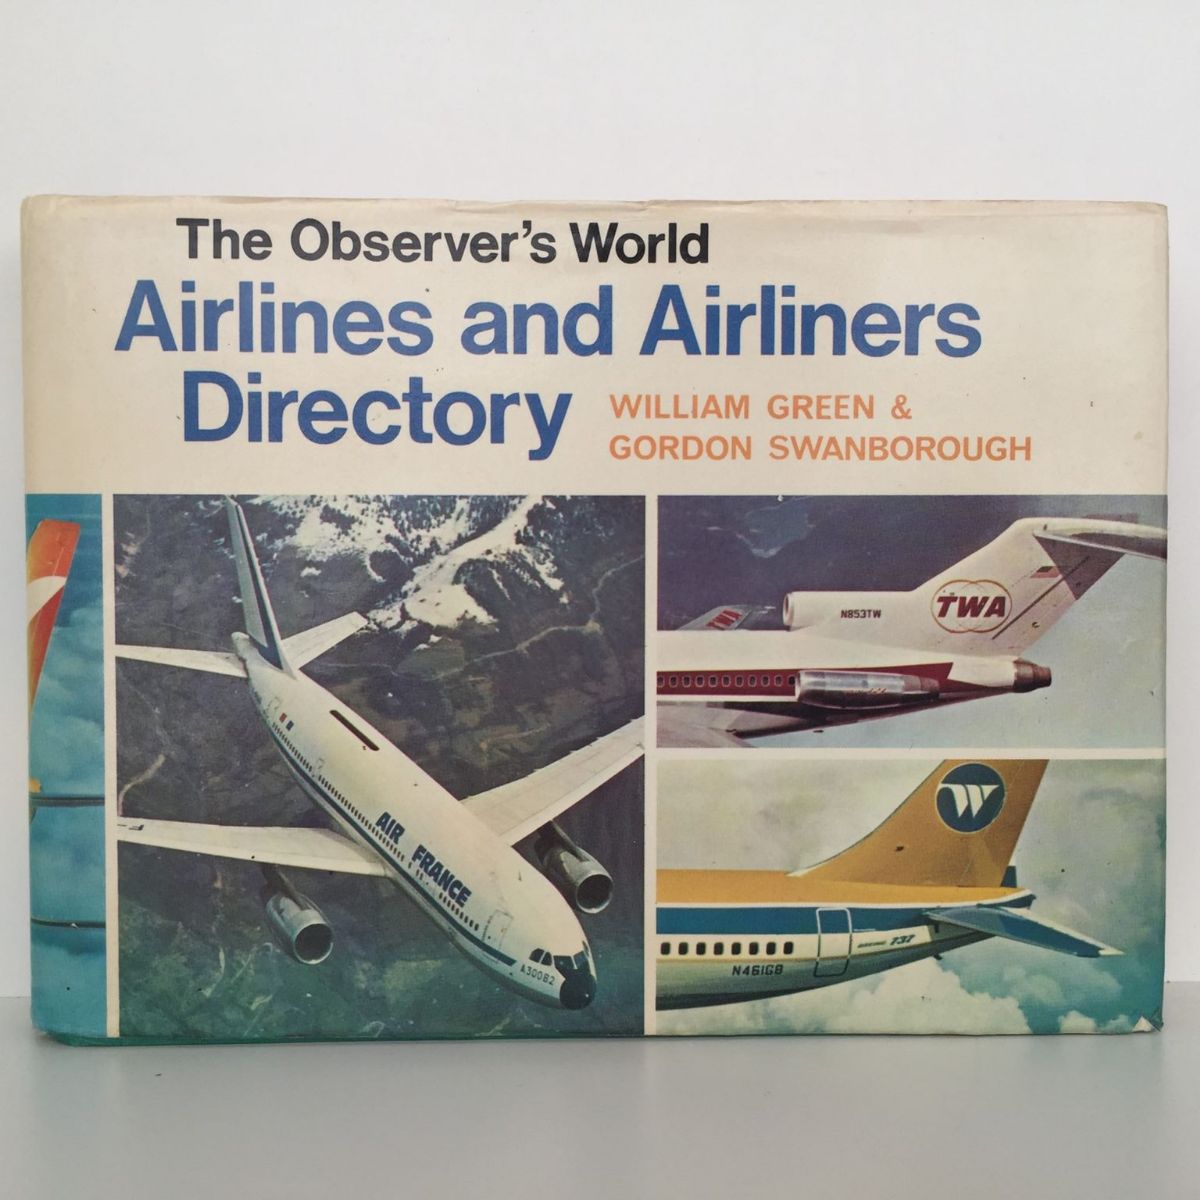 The Observer's World Airlines and Airliners Directory